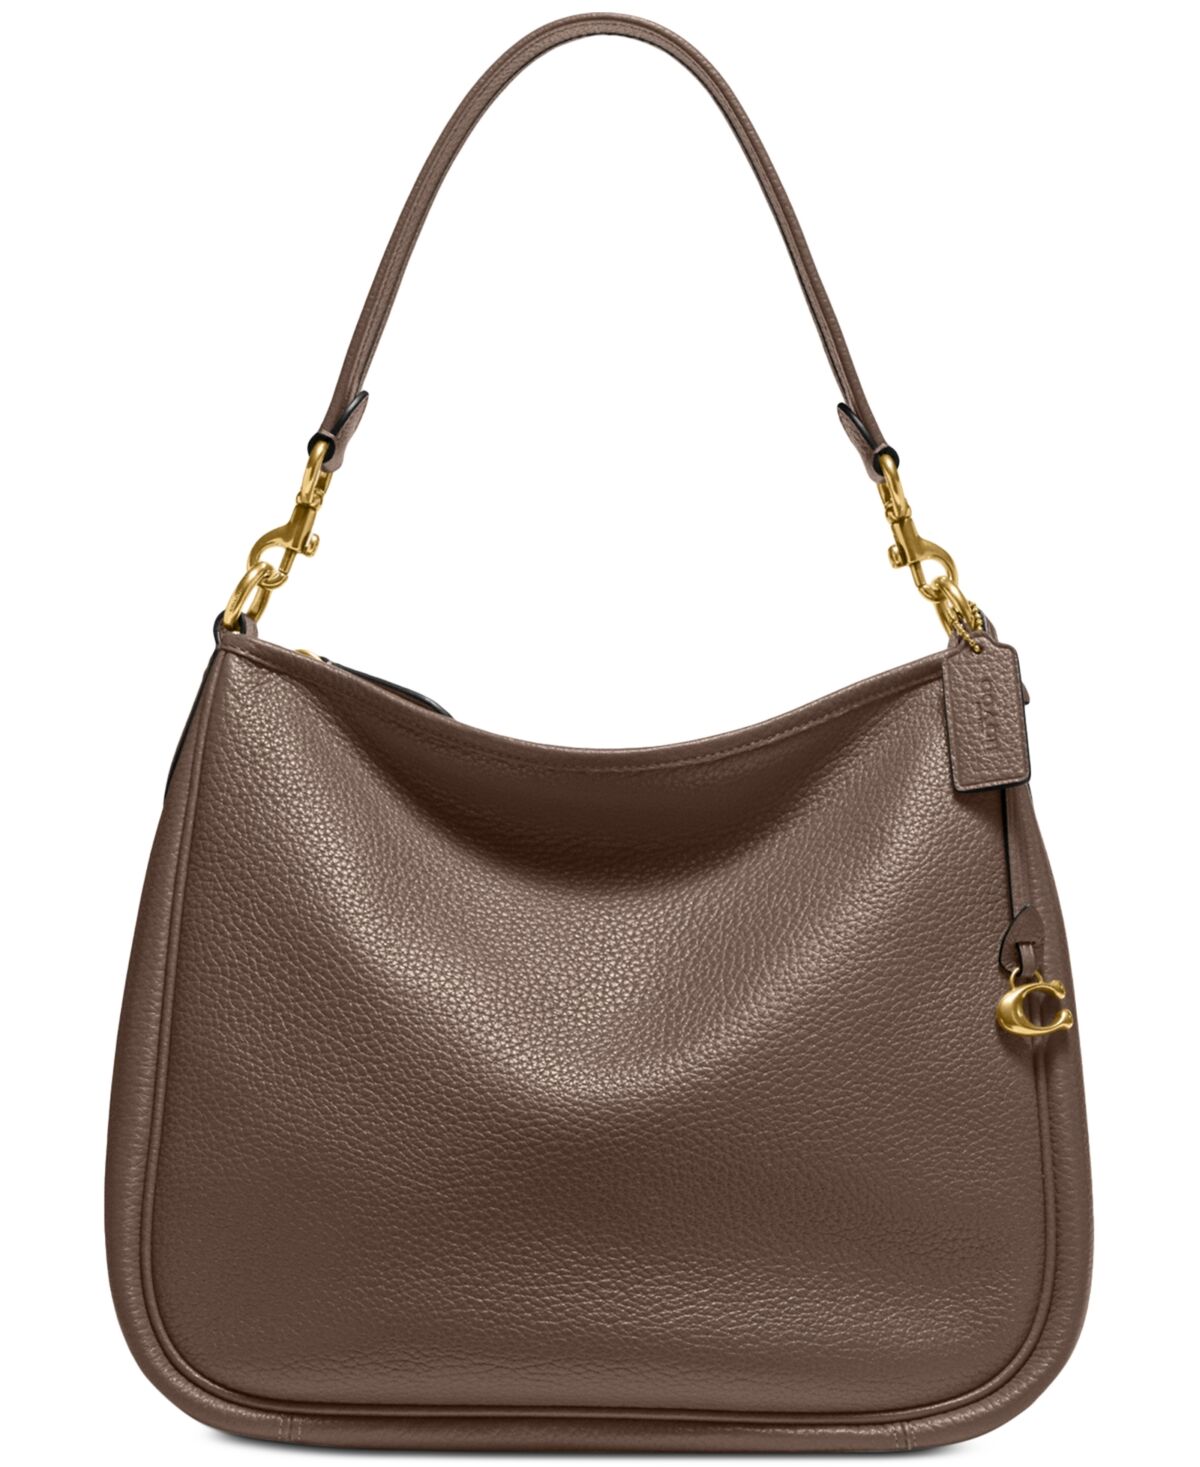 Coach Soft Pebble Leather Cary Shoulder Bag with Convertible Straps - Dark Stone